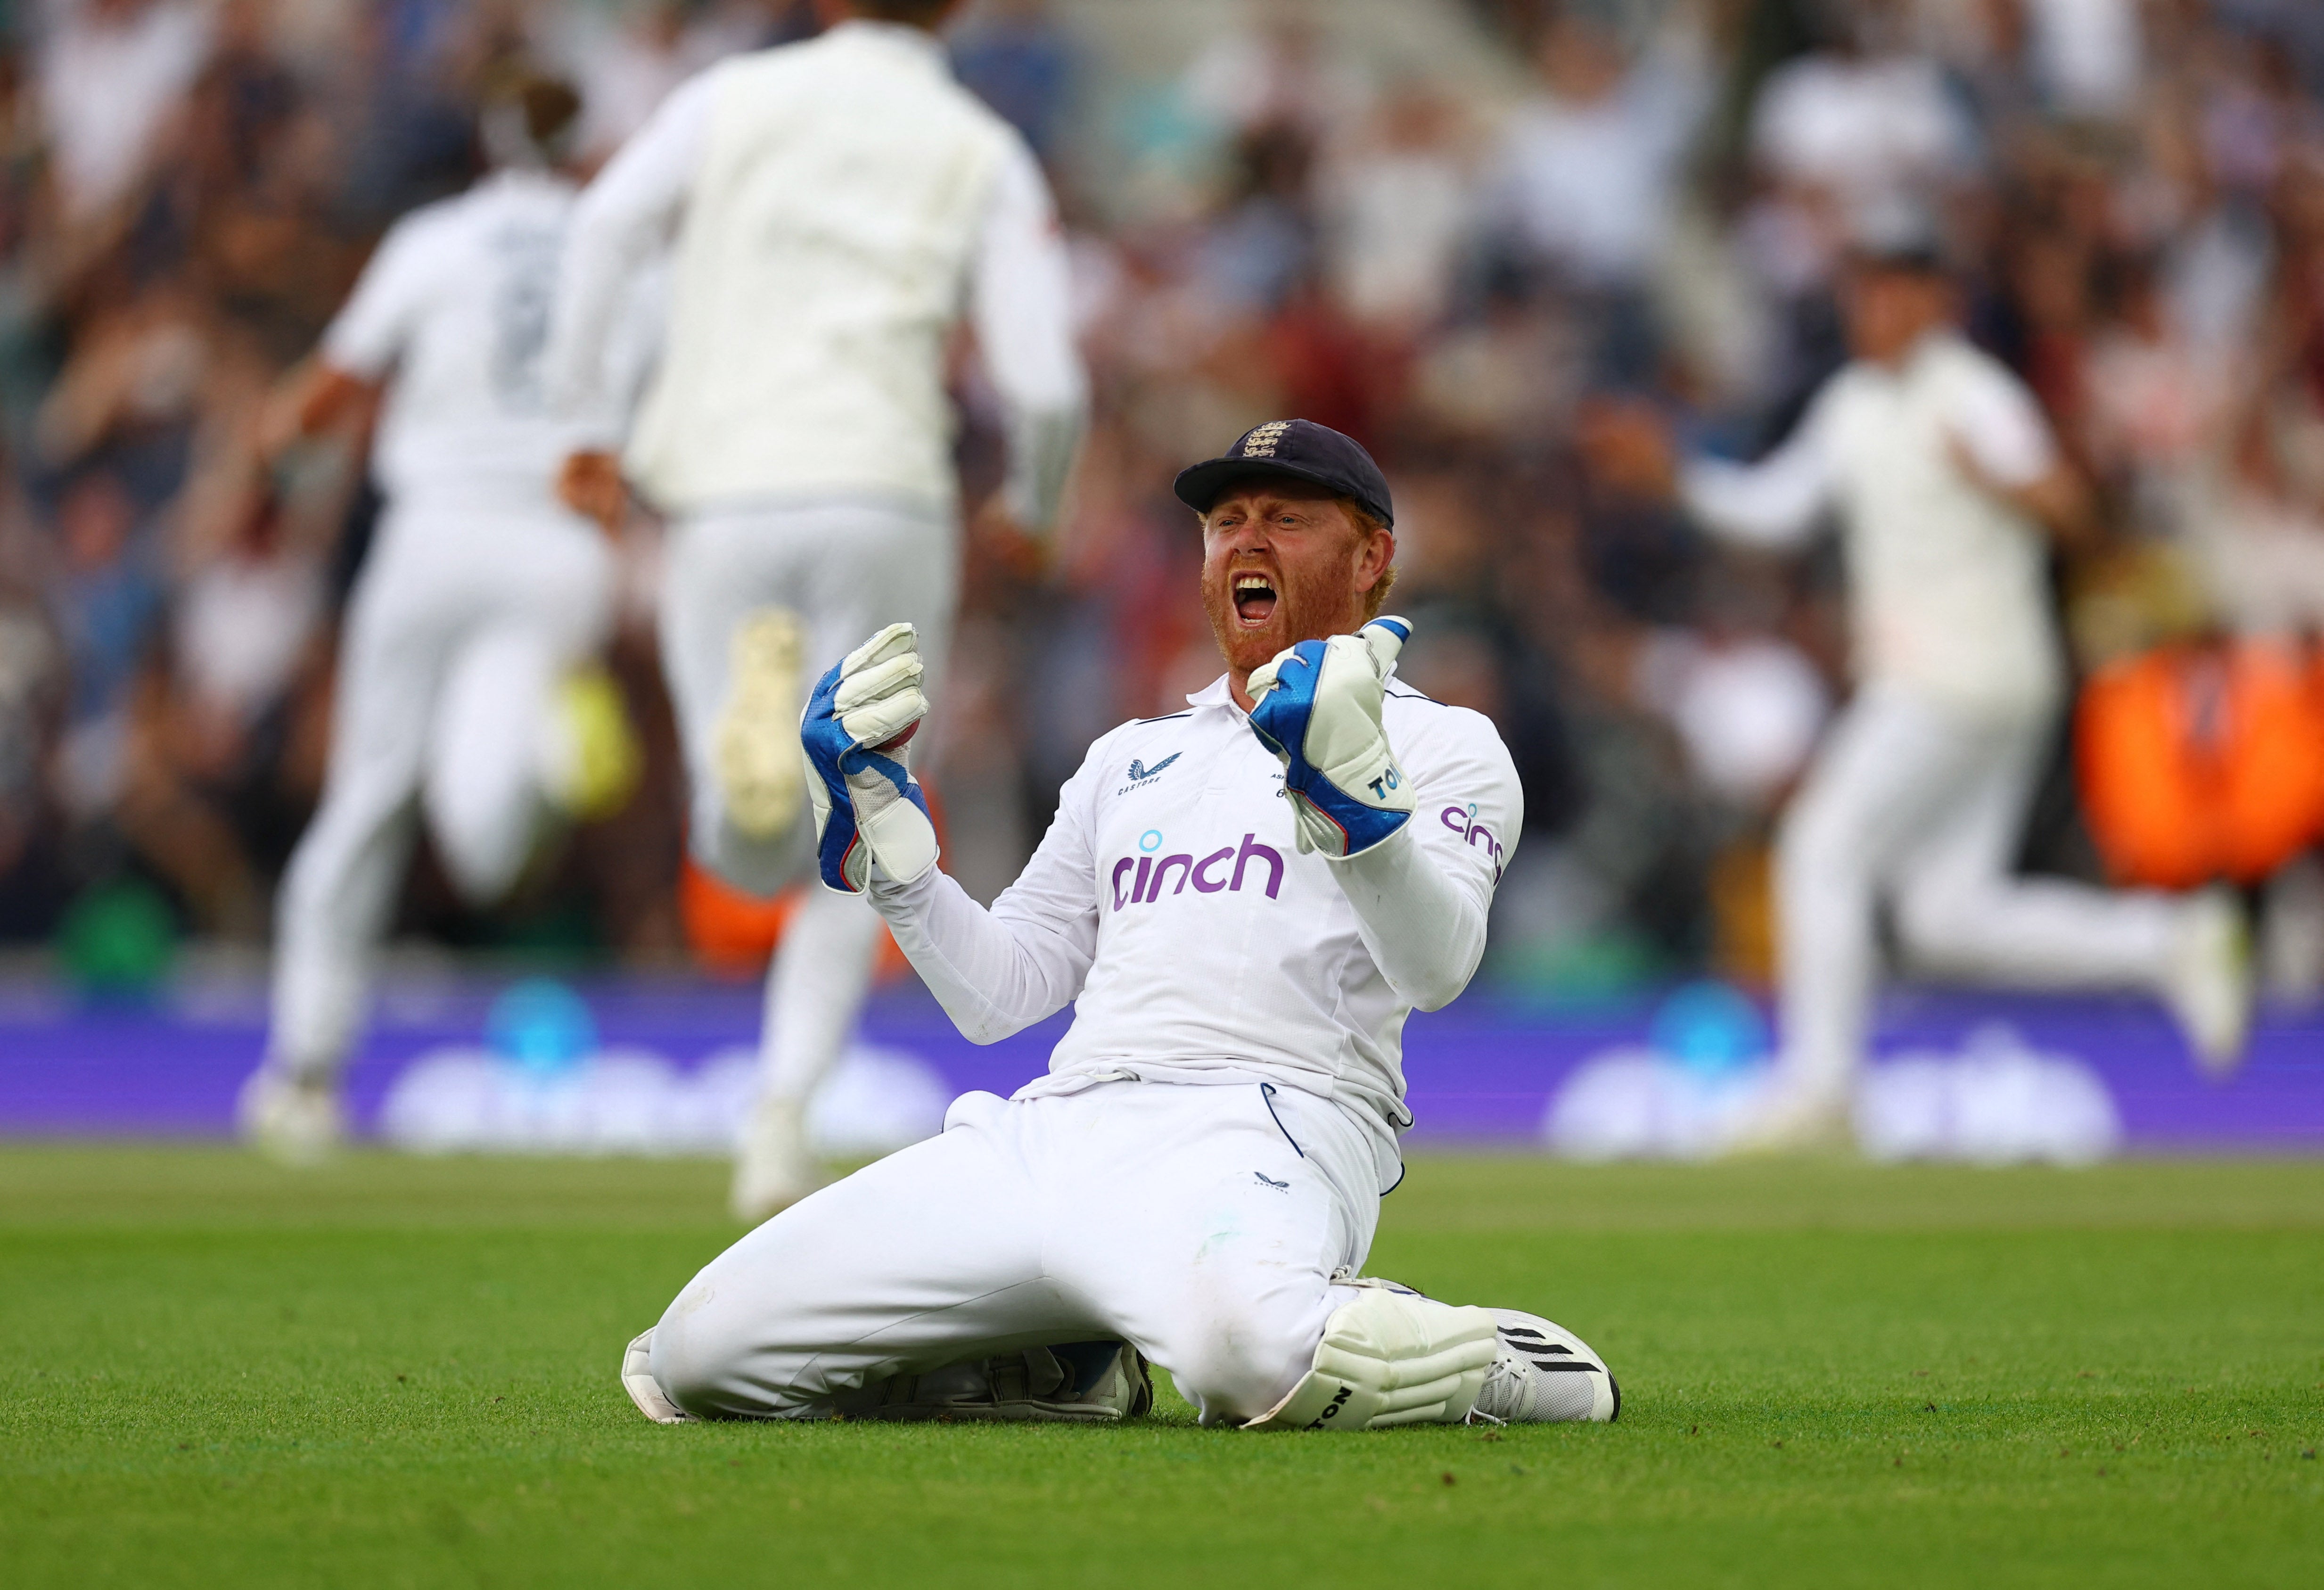 Jonny Bairstow took a catch to dismiss Australia’s Todd Murphy off the bowling of England’s Stuart Broad